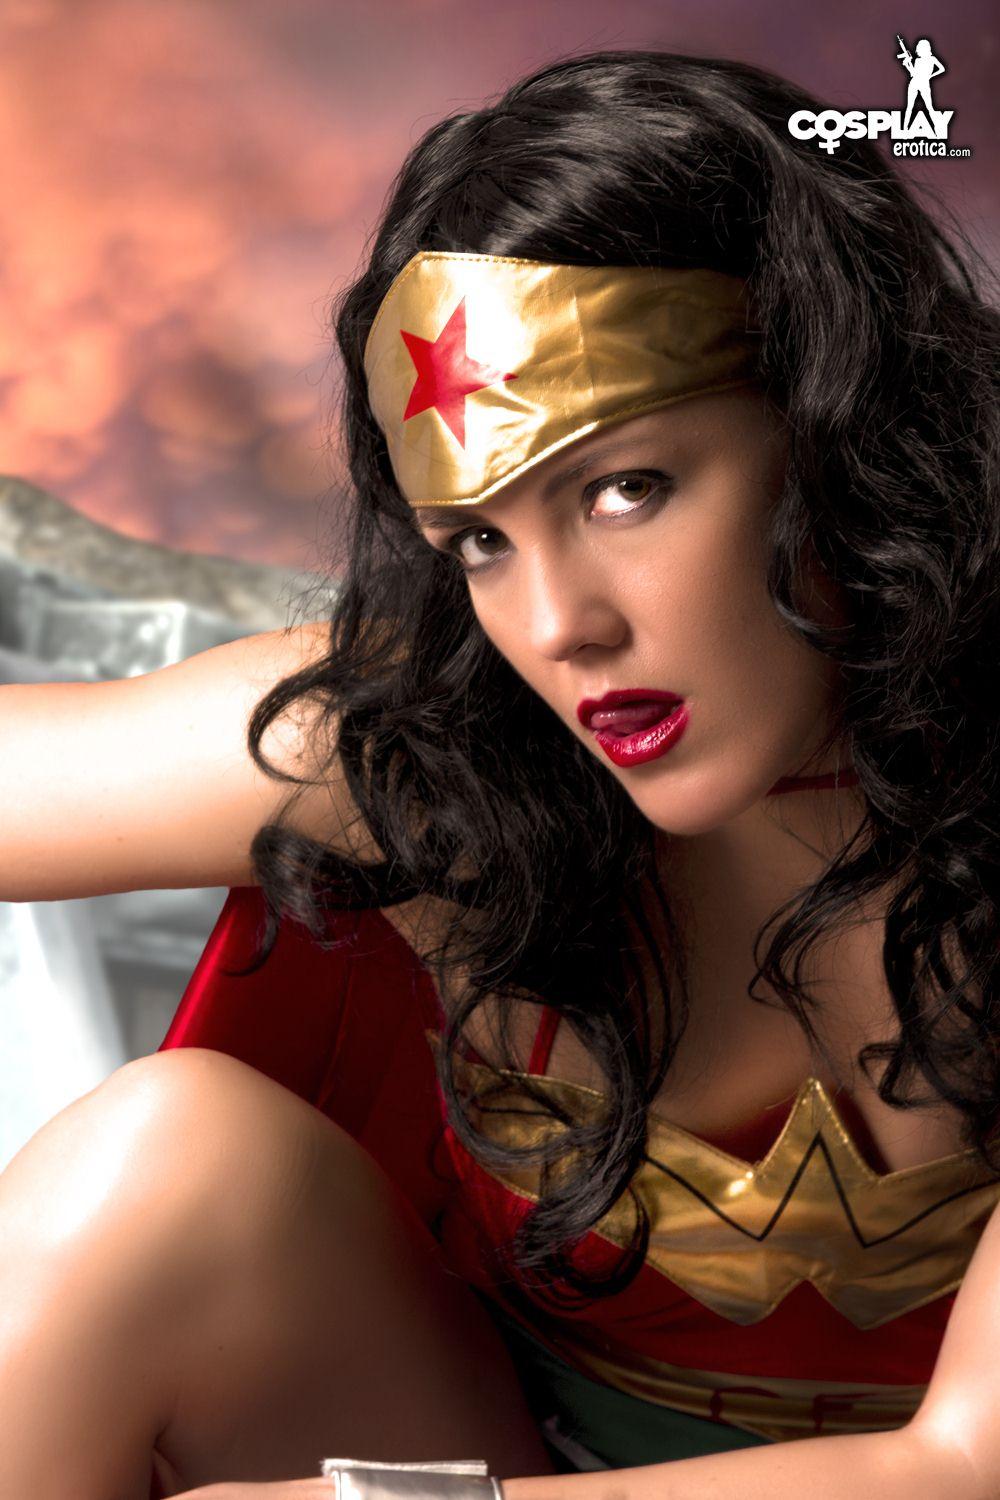 Pictures of stunning cosplayer Gogo dressed up as Wonder Woman #54560211